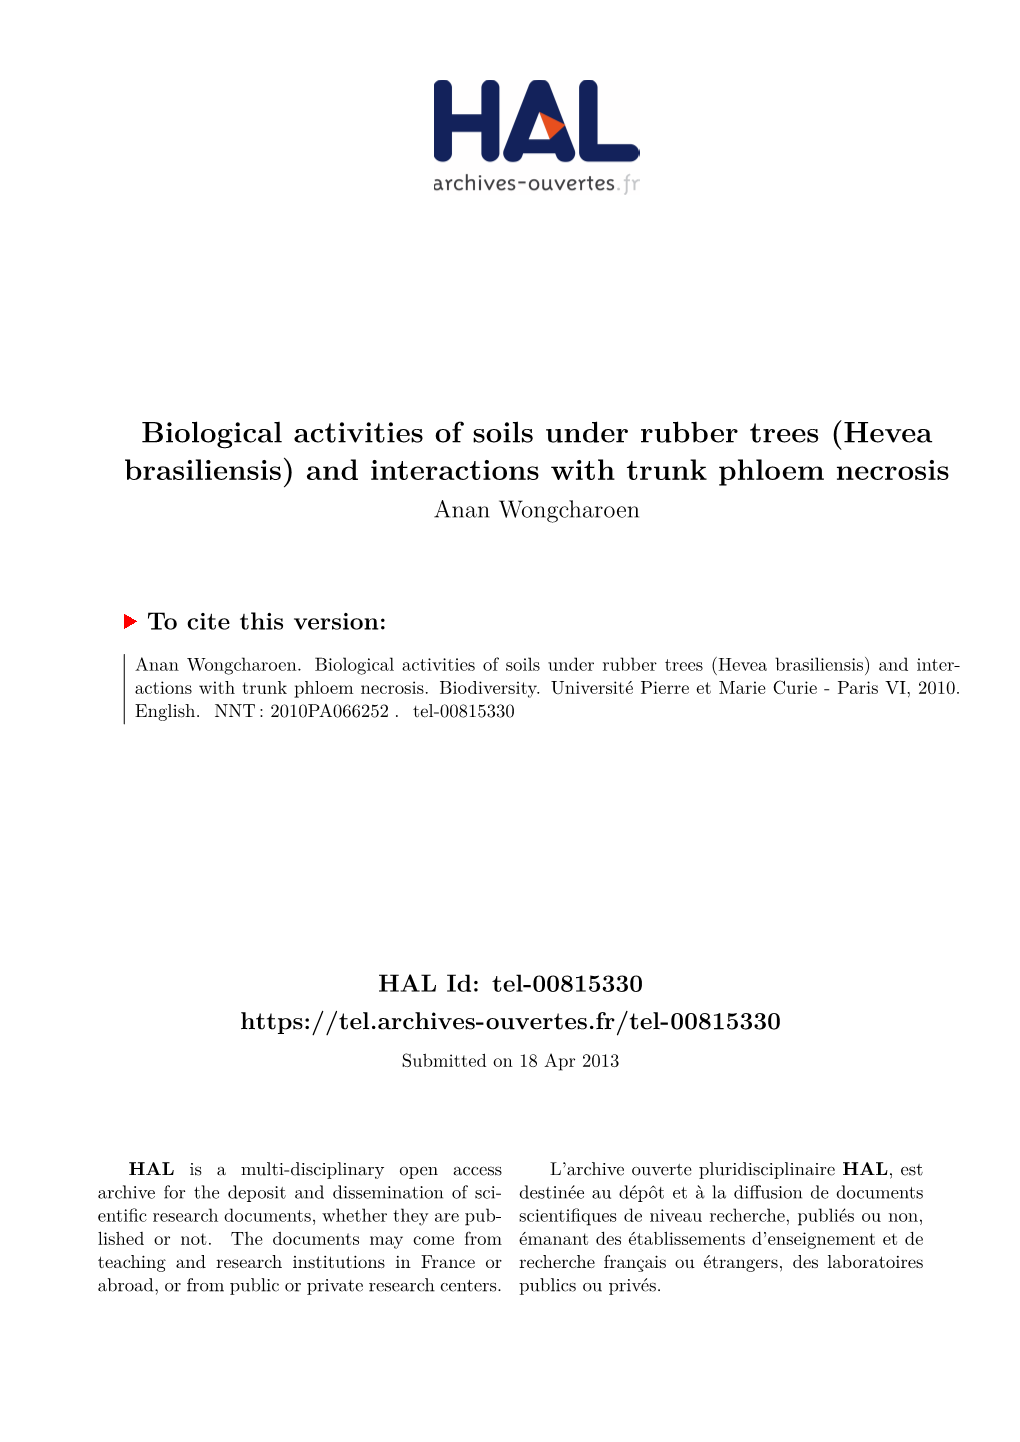 Biological Activities of Soils Under Rubber Trees (Hevea Brasiliensis) and Interactions with Trunk Phloem Necrosis Anan Wongcharoen